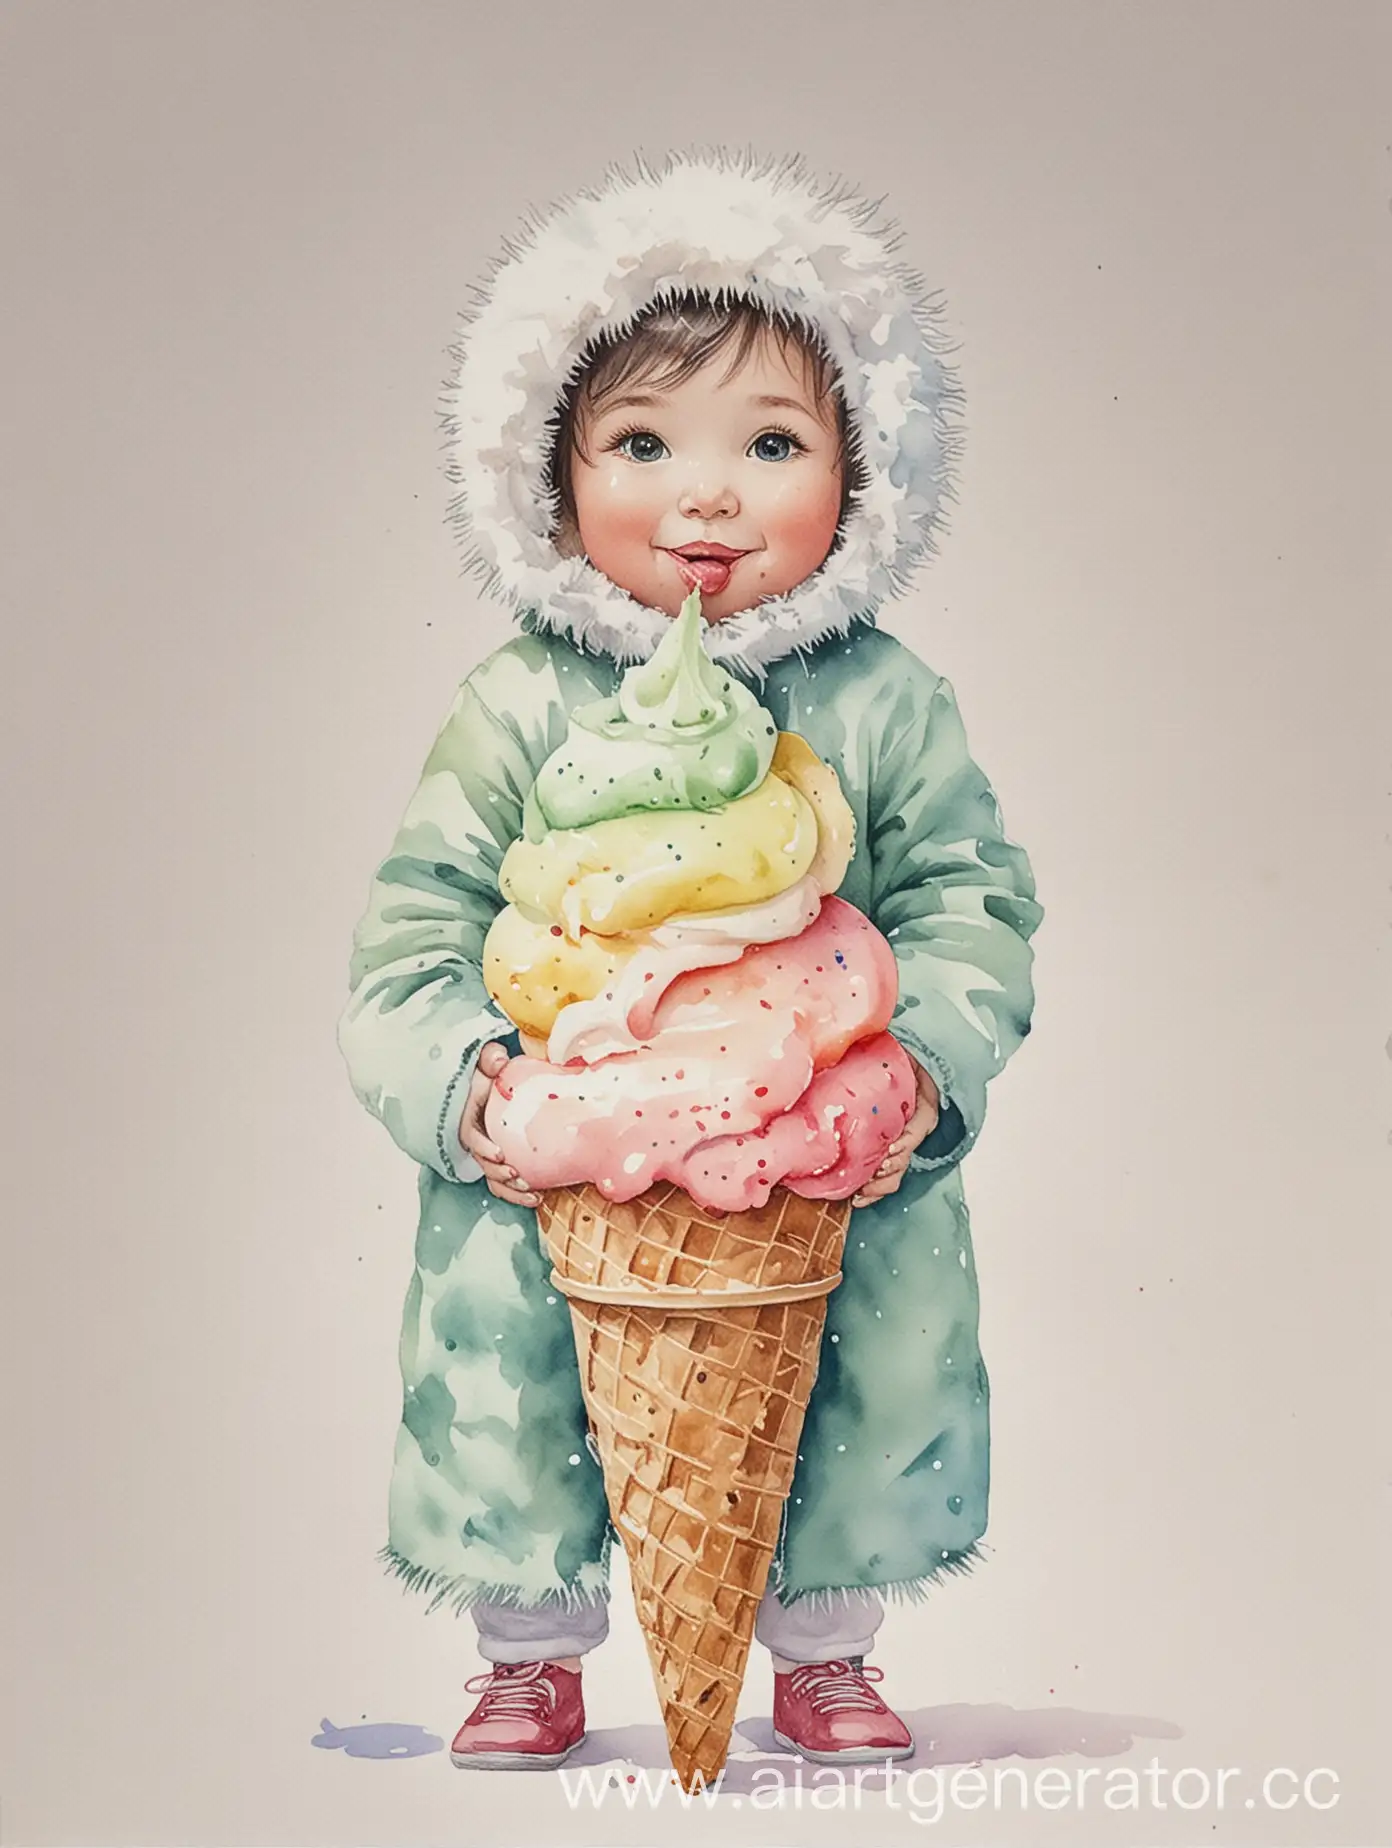 Colorful-Watercolor-Painting-of-an-Eskimo-Enjoying-Ice-Cream